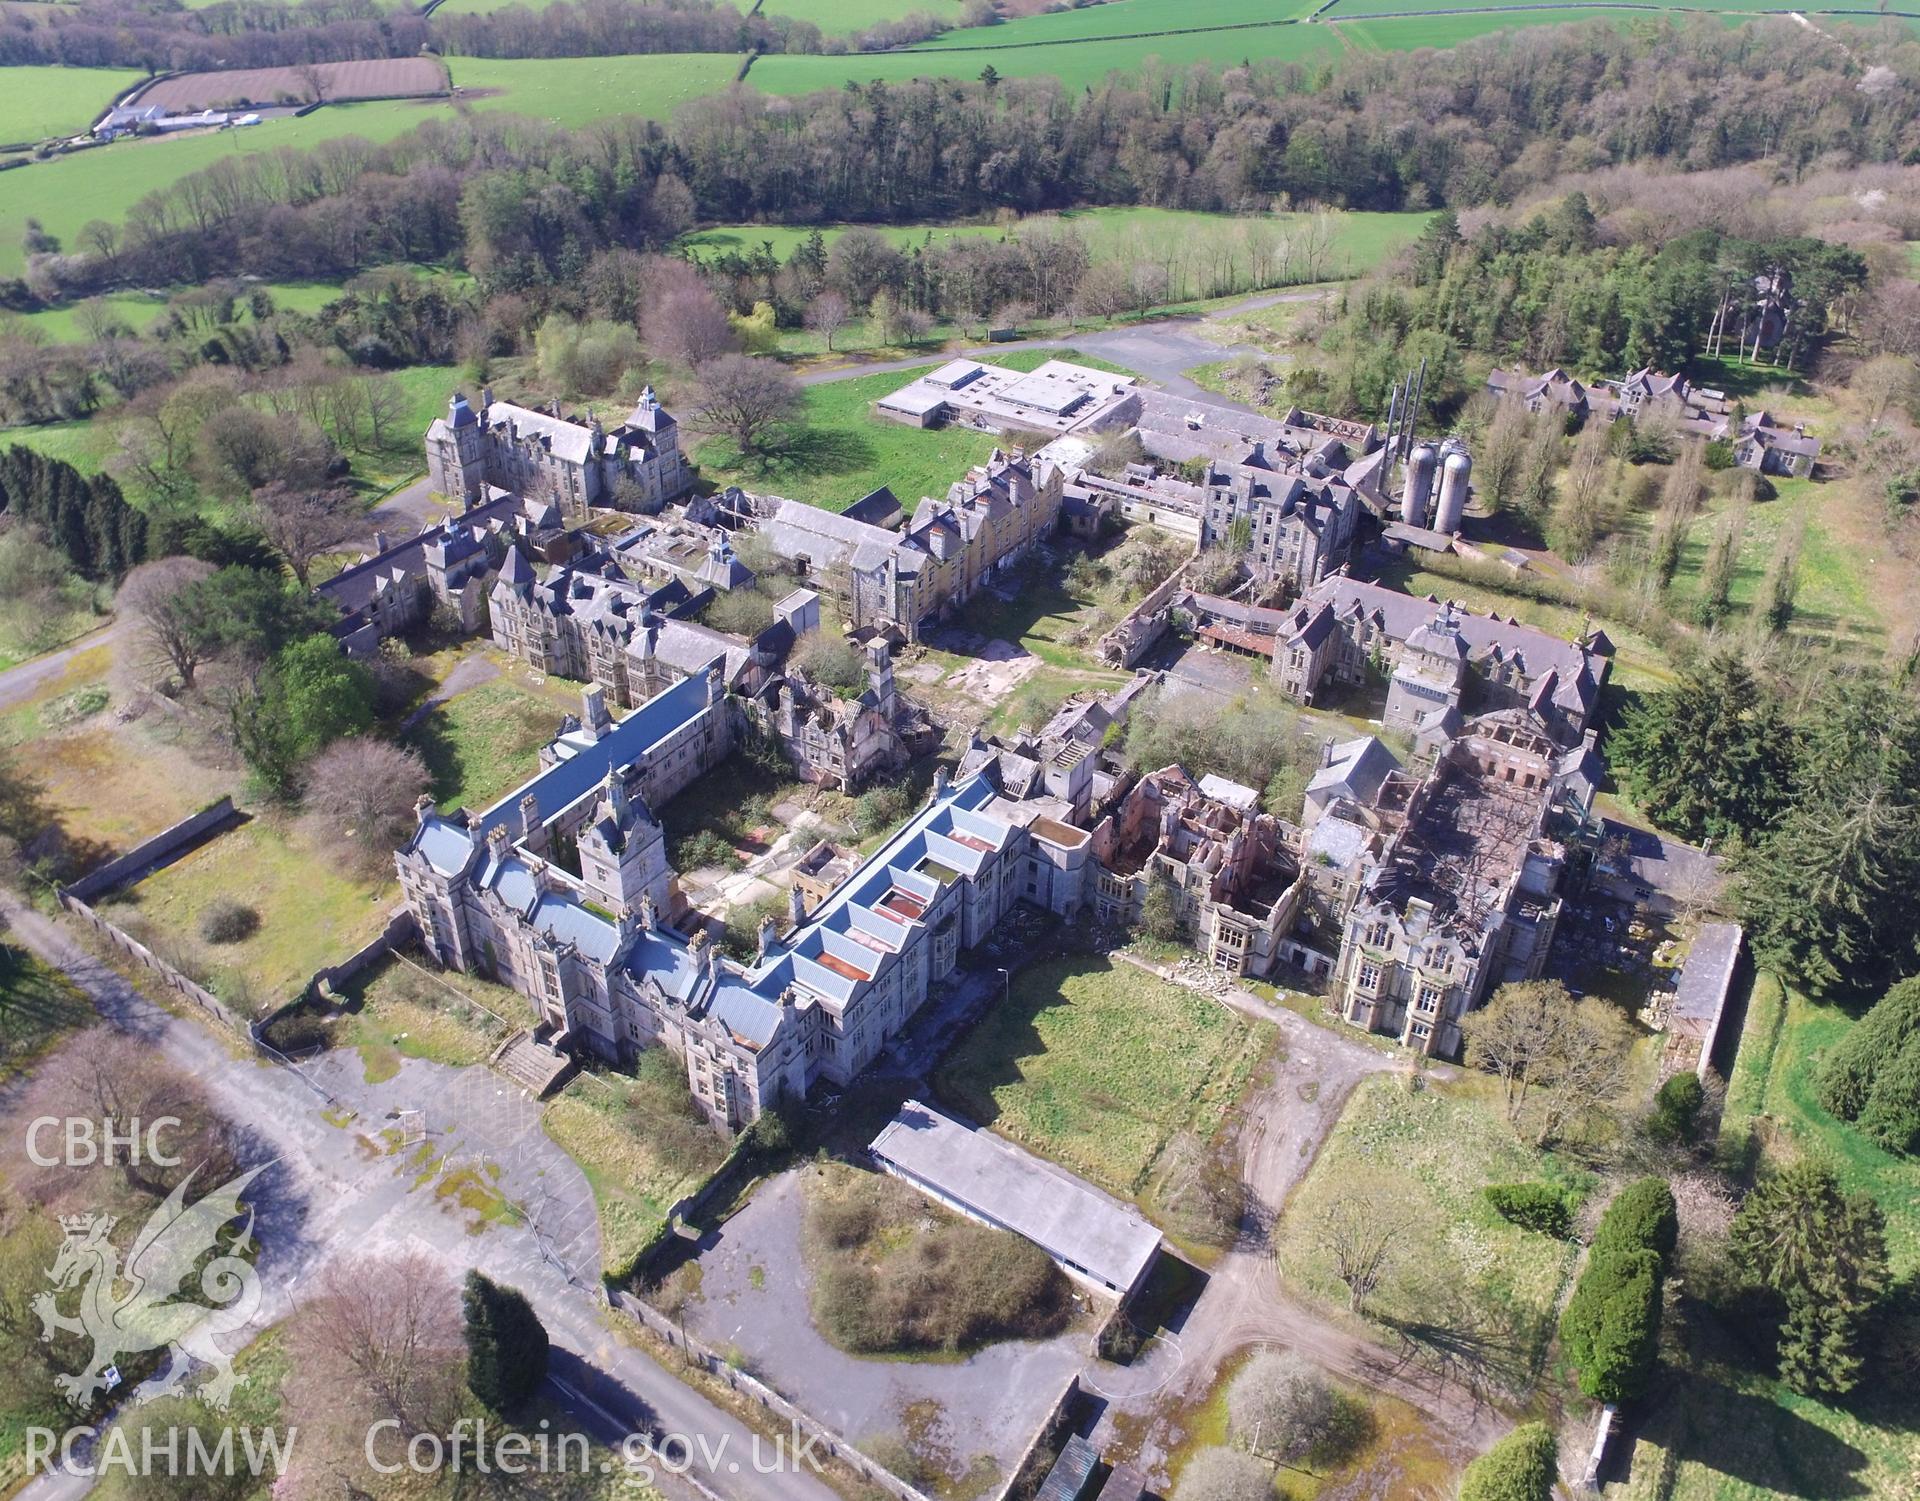 Colour photo showing aerial view of North Wales Counties Mental Hospital complex, Denbigh, taken by Paul R. Davis, 20th April 2018.